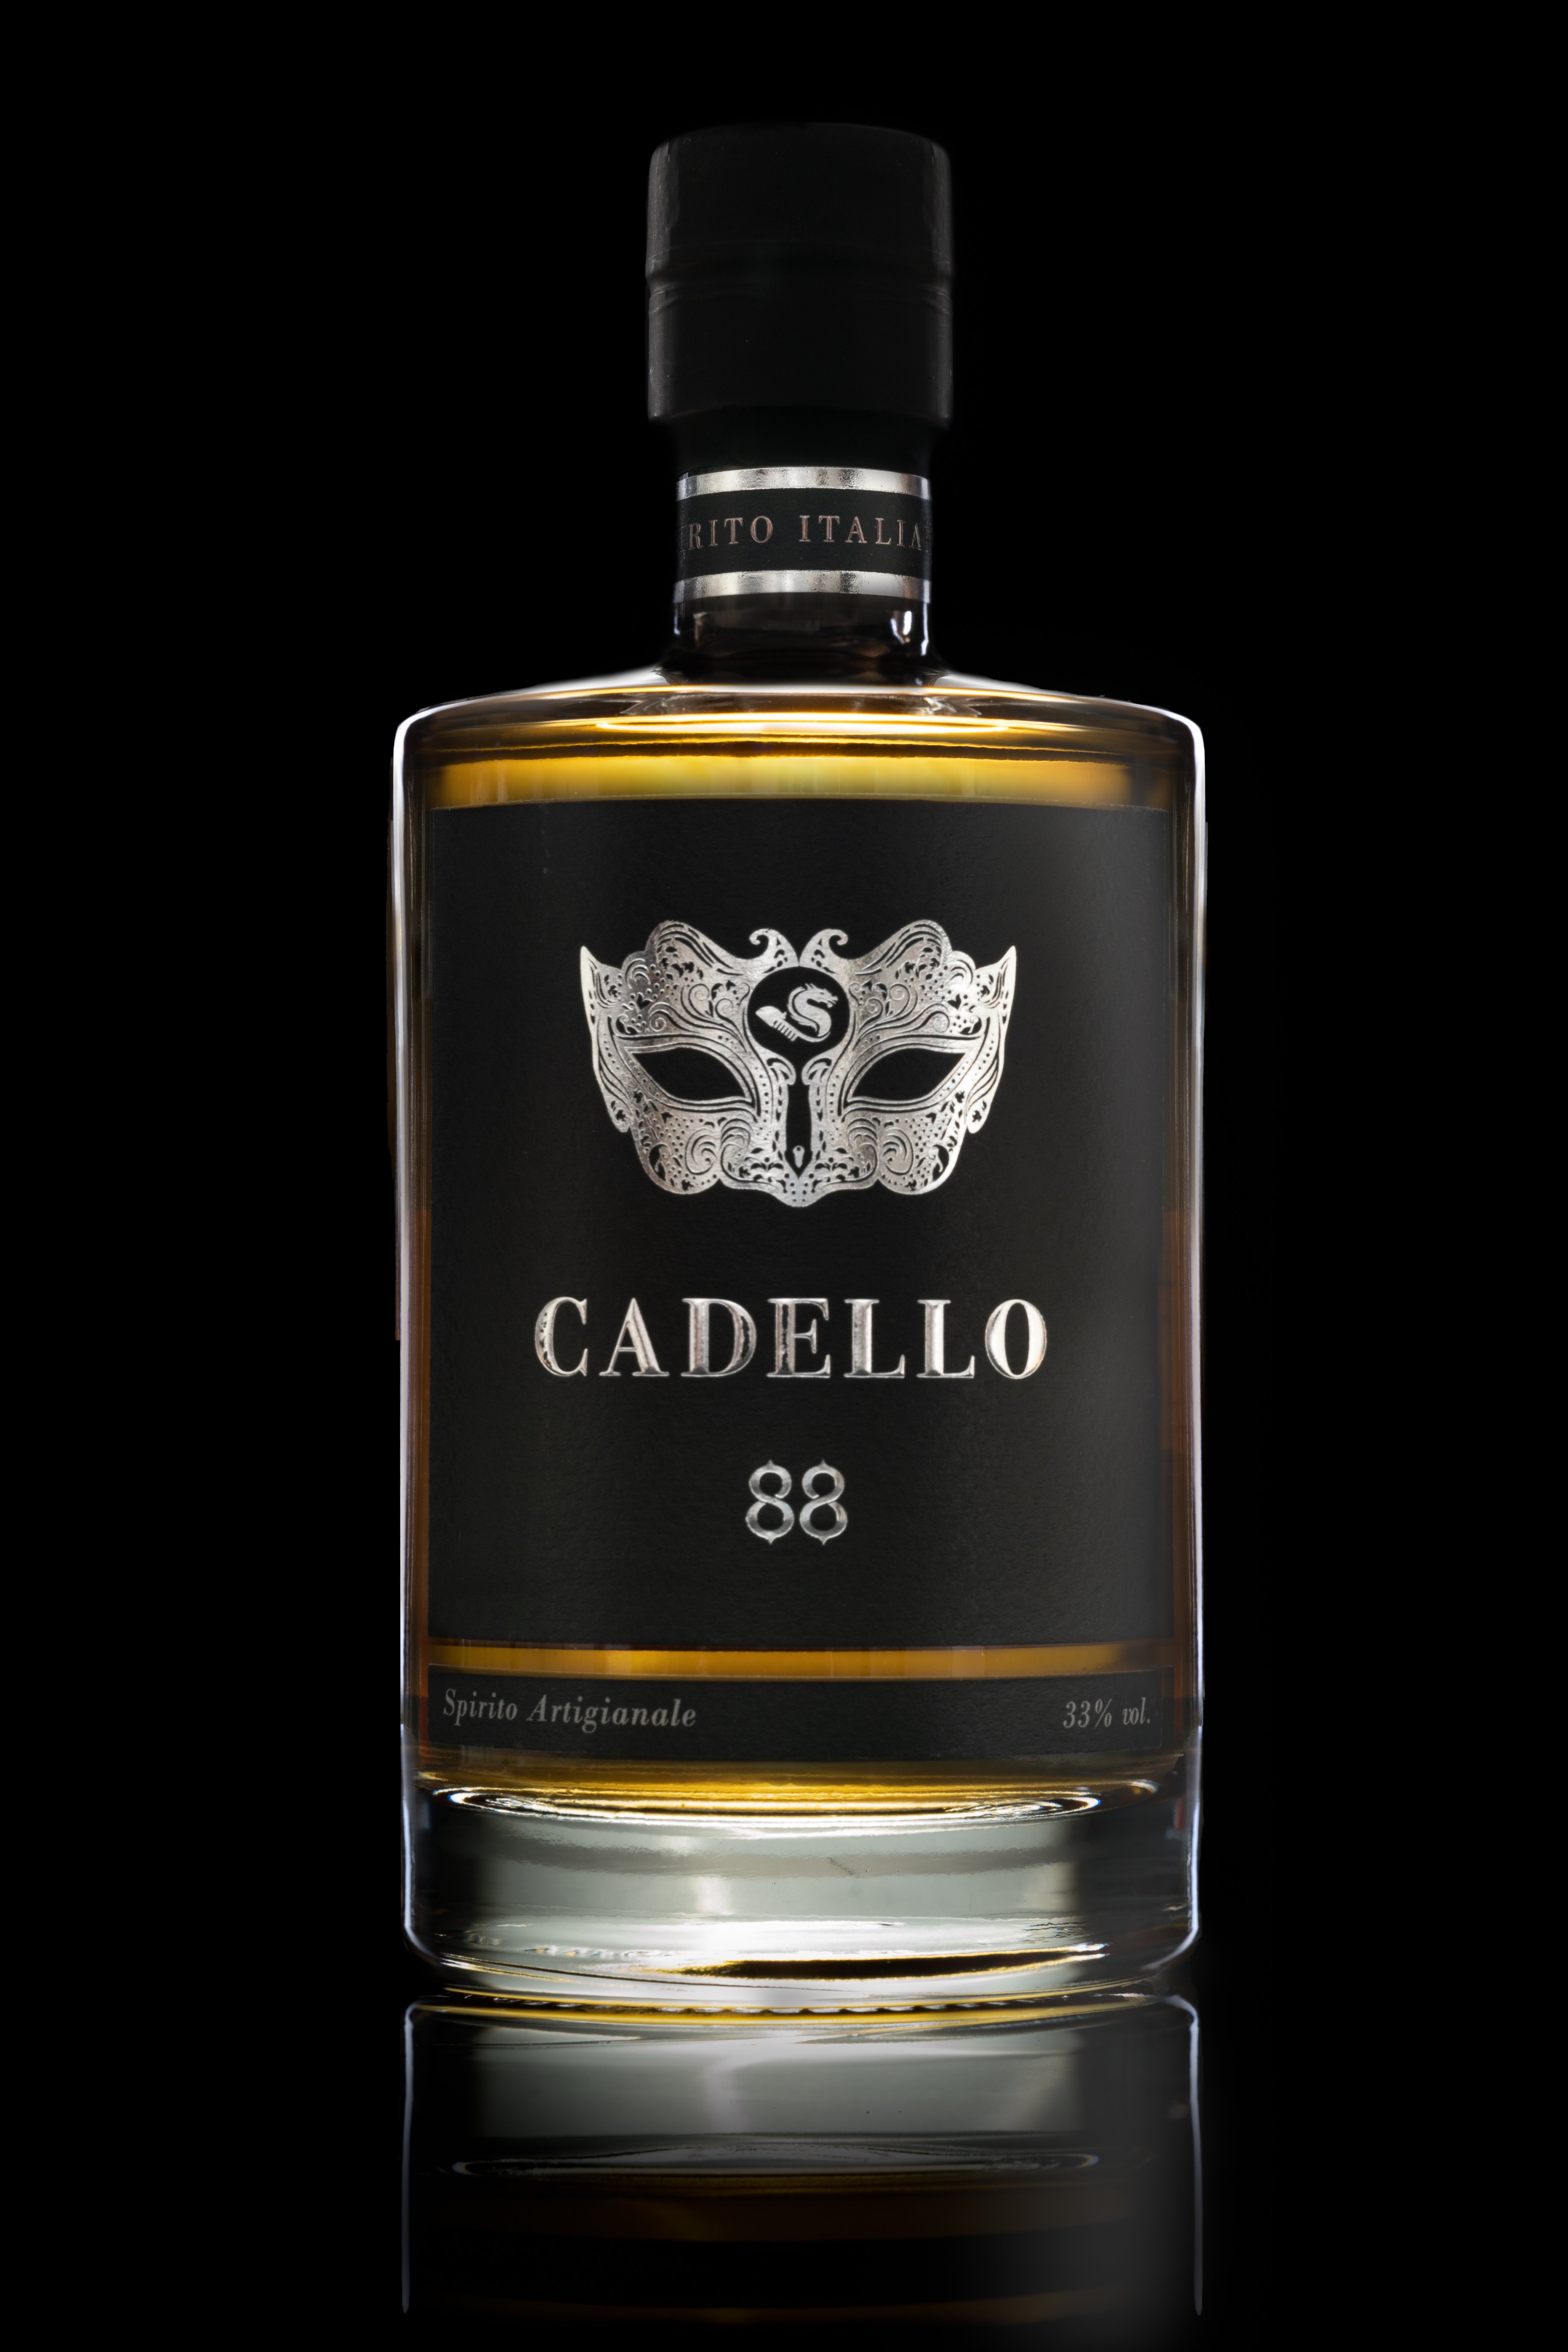 Cadello 88 spirits bottle with metallic label produced by Premier Labels